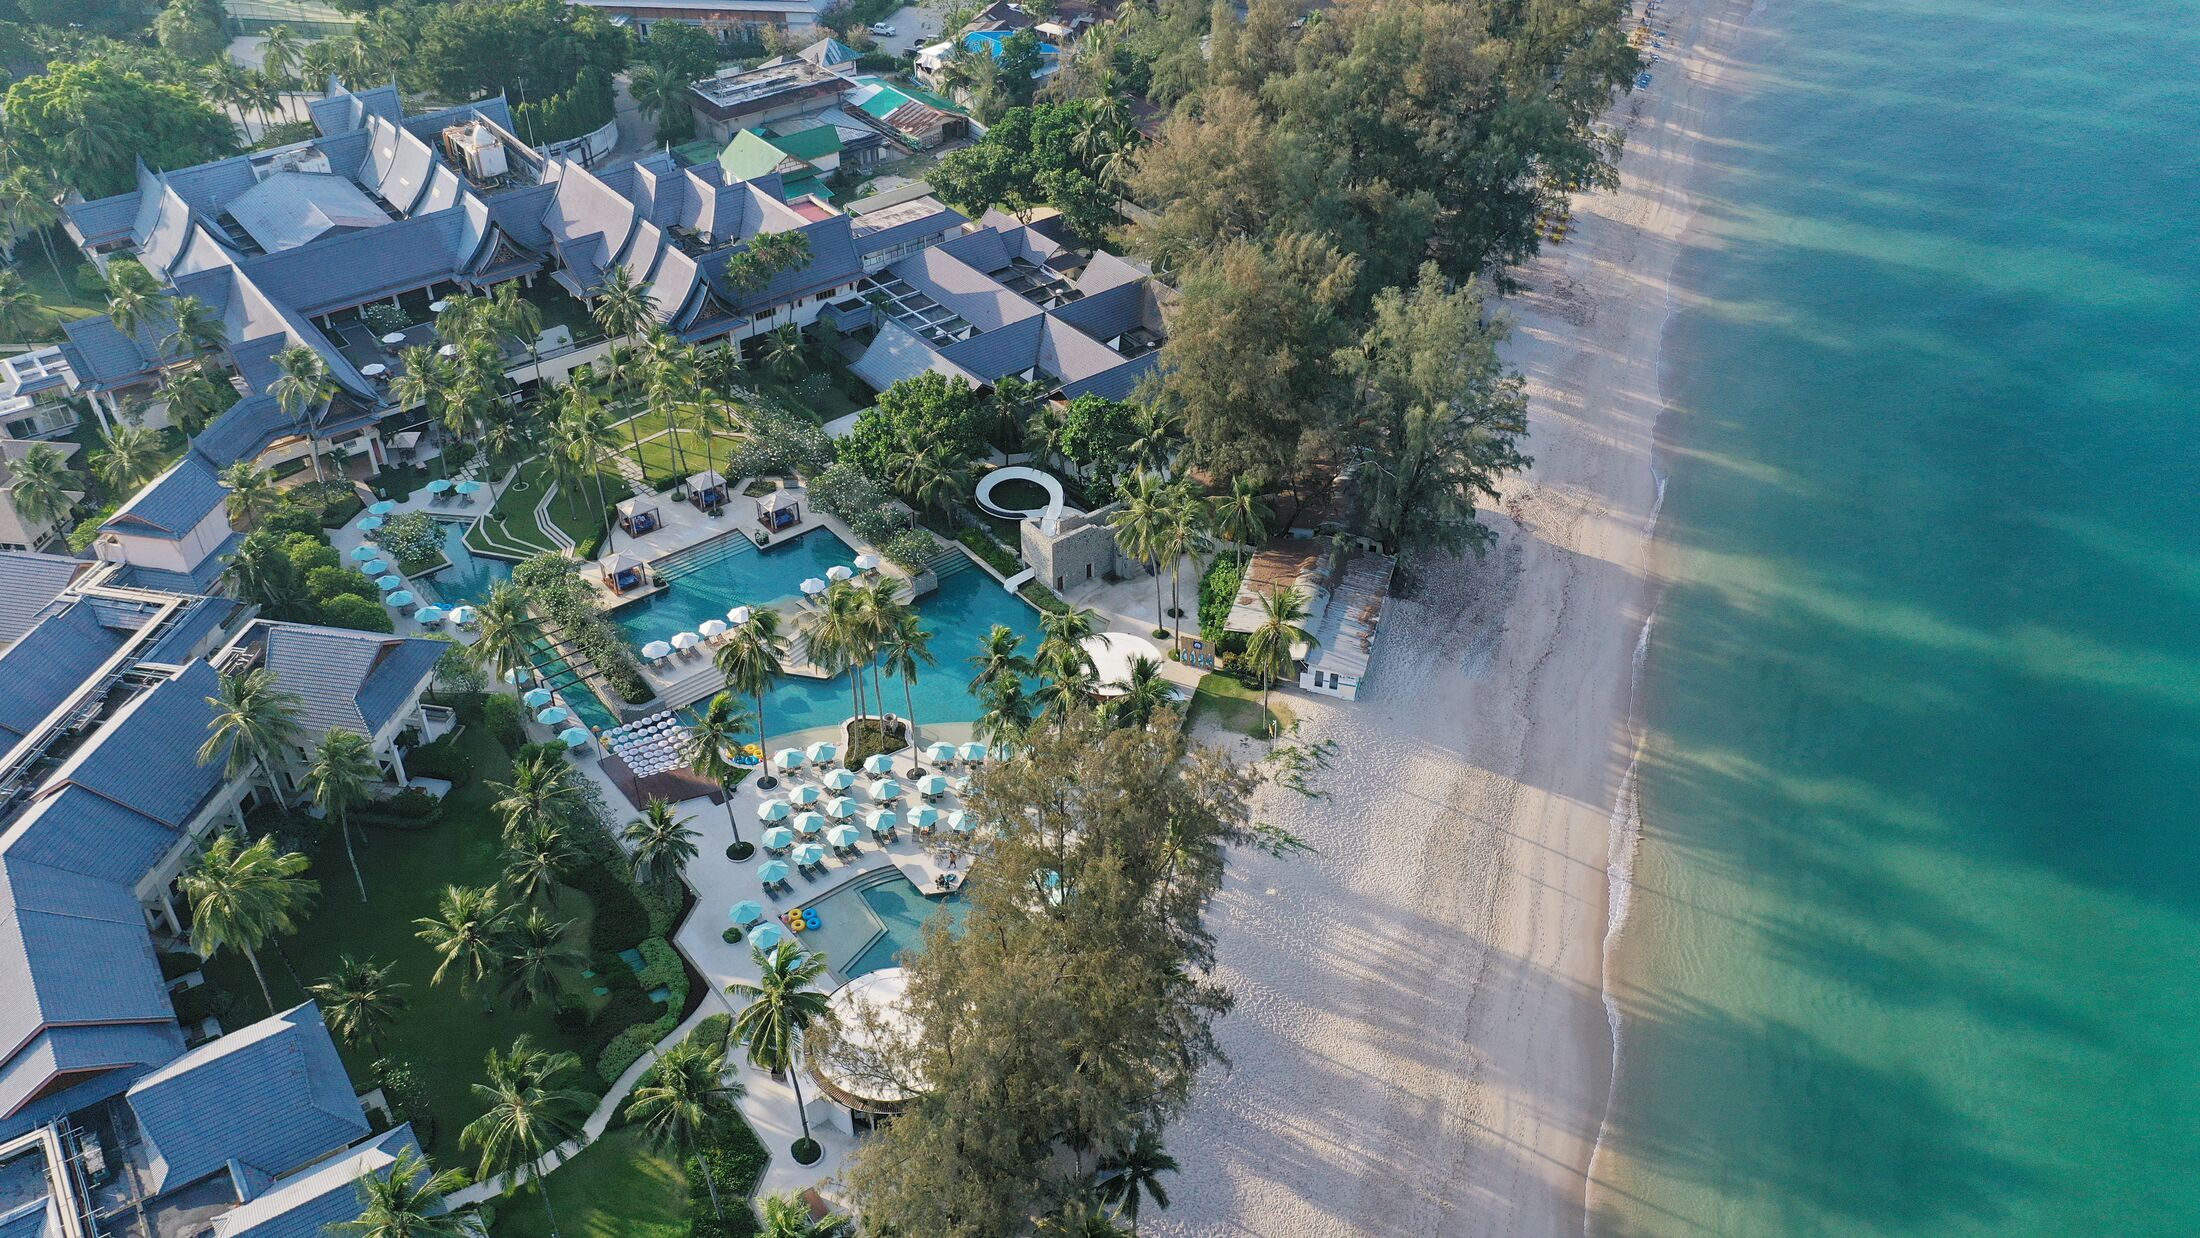 Central Phuket, Luxury & Leisure Beach Lifestyle Destination in Asia -   – Global Travel News and Updates